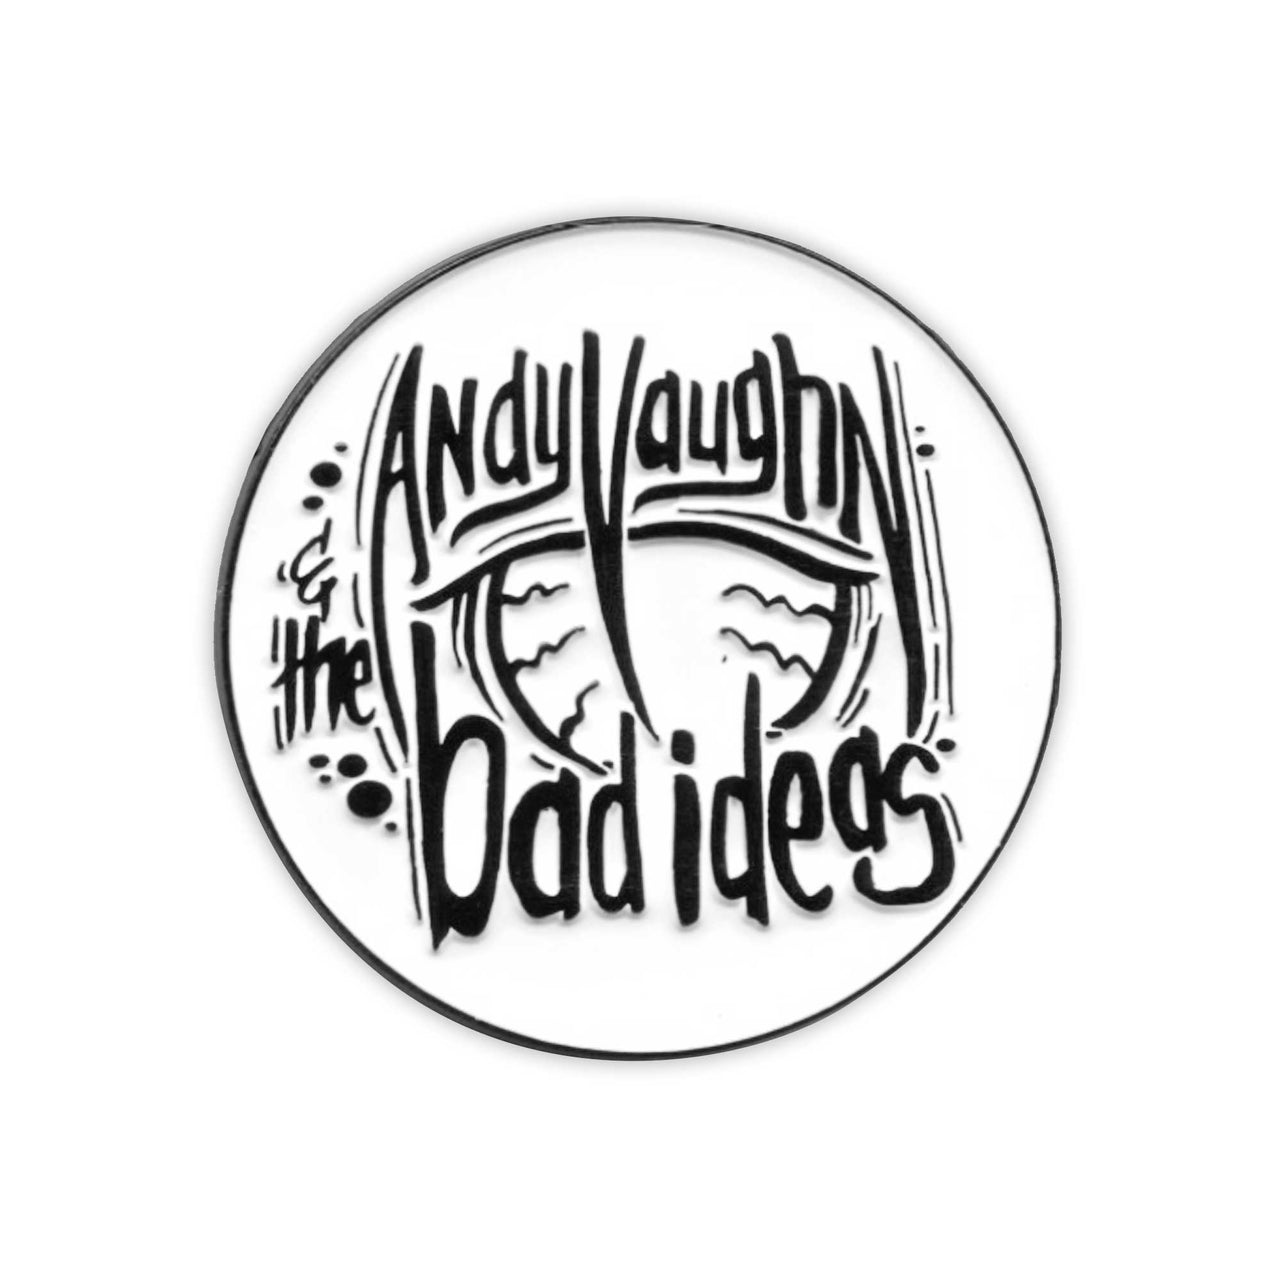 ANDY VAUGHN AND THE BAD IDEAS ENAMEL PIN